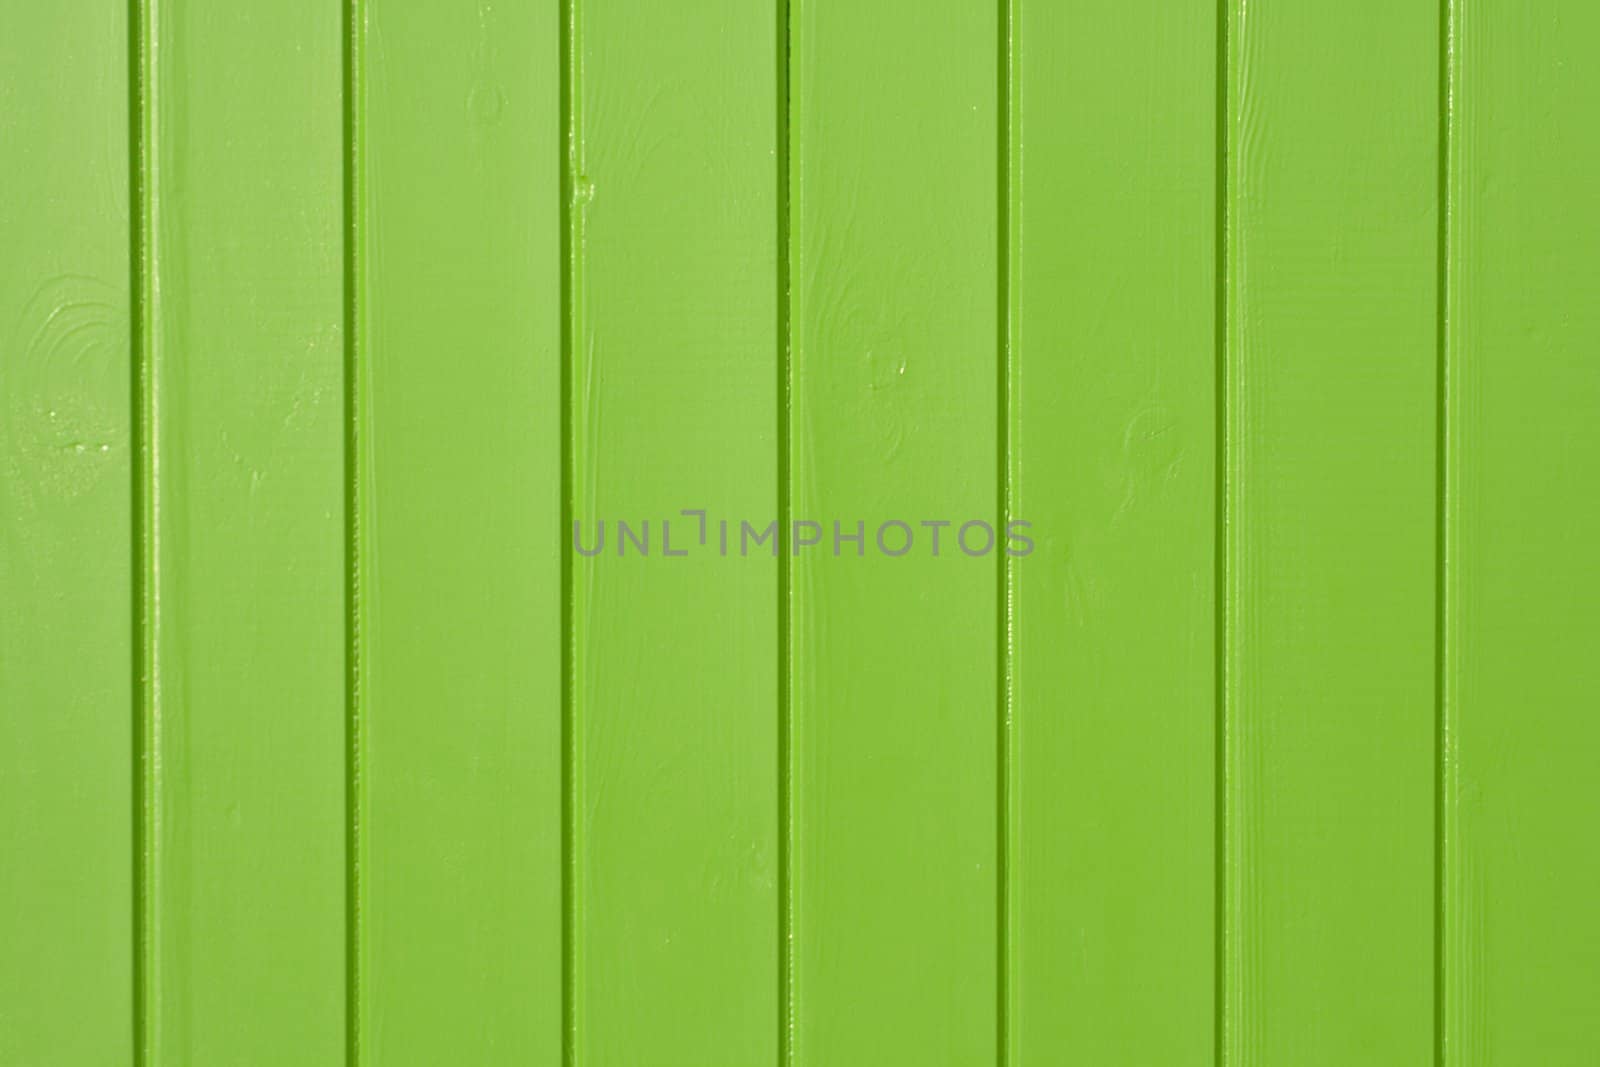 A green painted wooden panel background